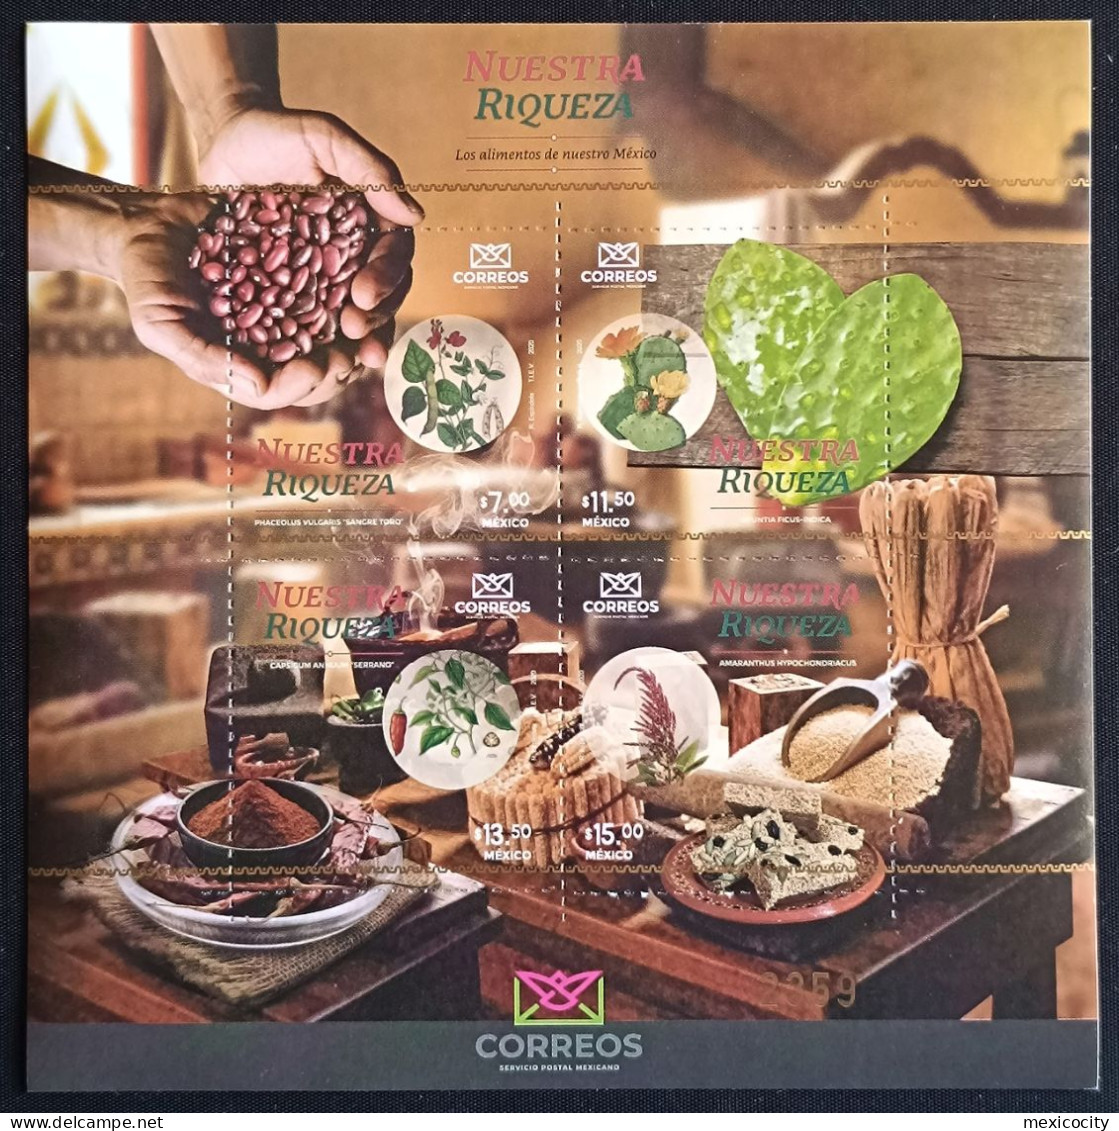 MEXICO 2020 FOODS Issue Nopal Cactii, Beans, Pepper, Amaranth LTD. ED. BLOC COLLECTOR, Mint NH Scarce - Messico